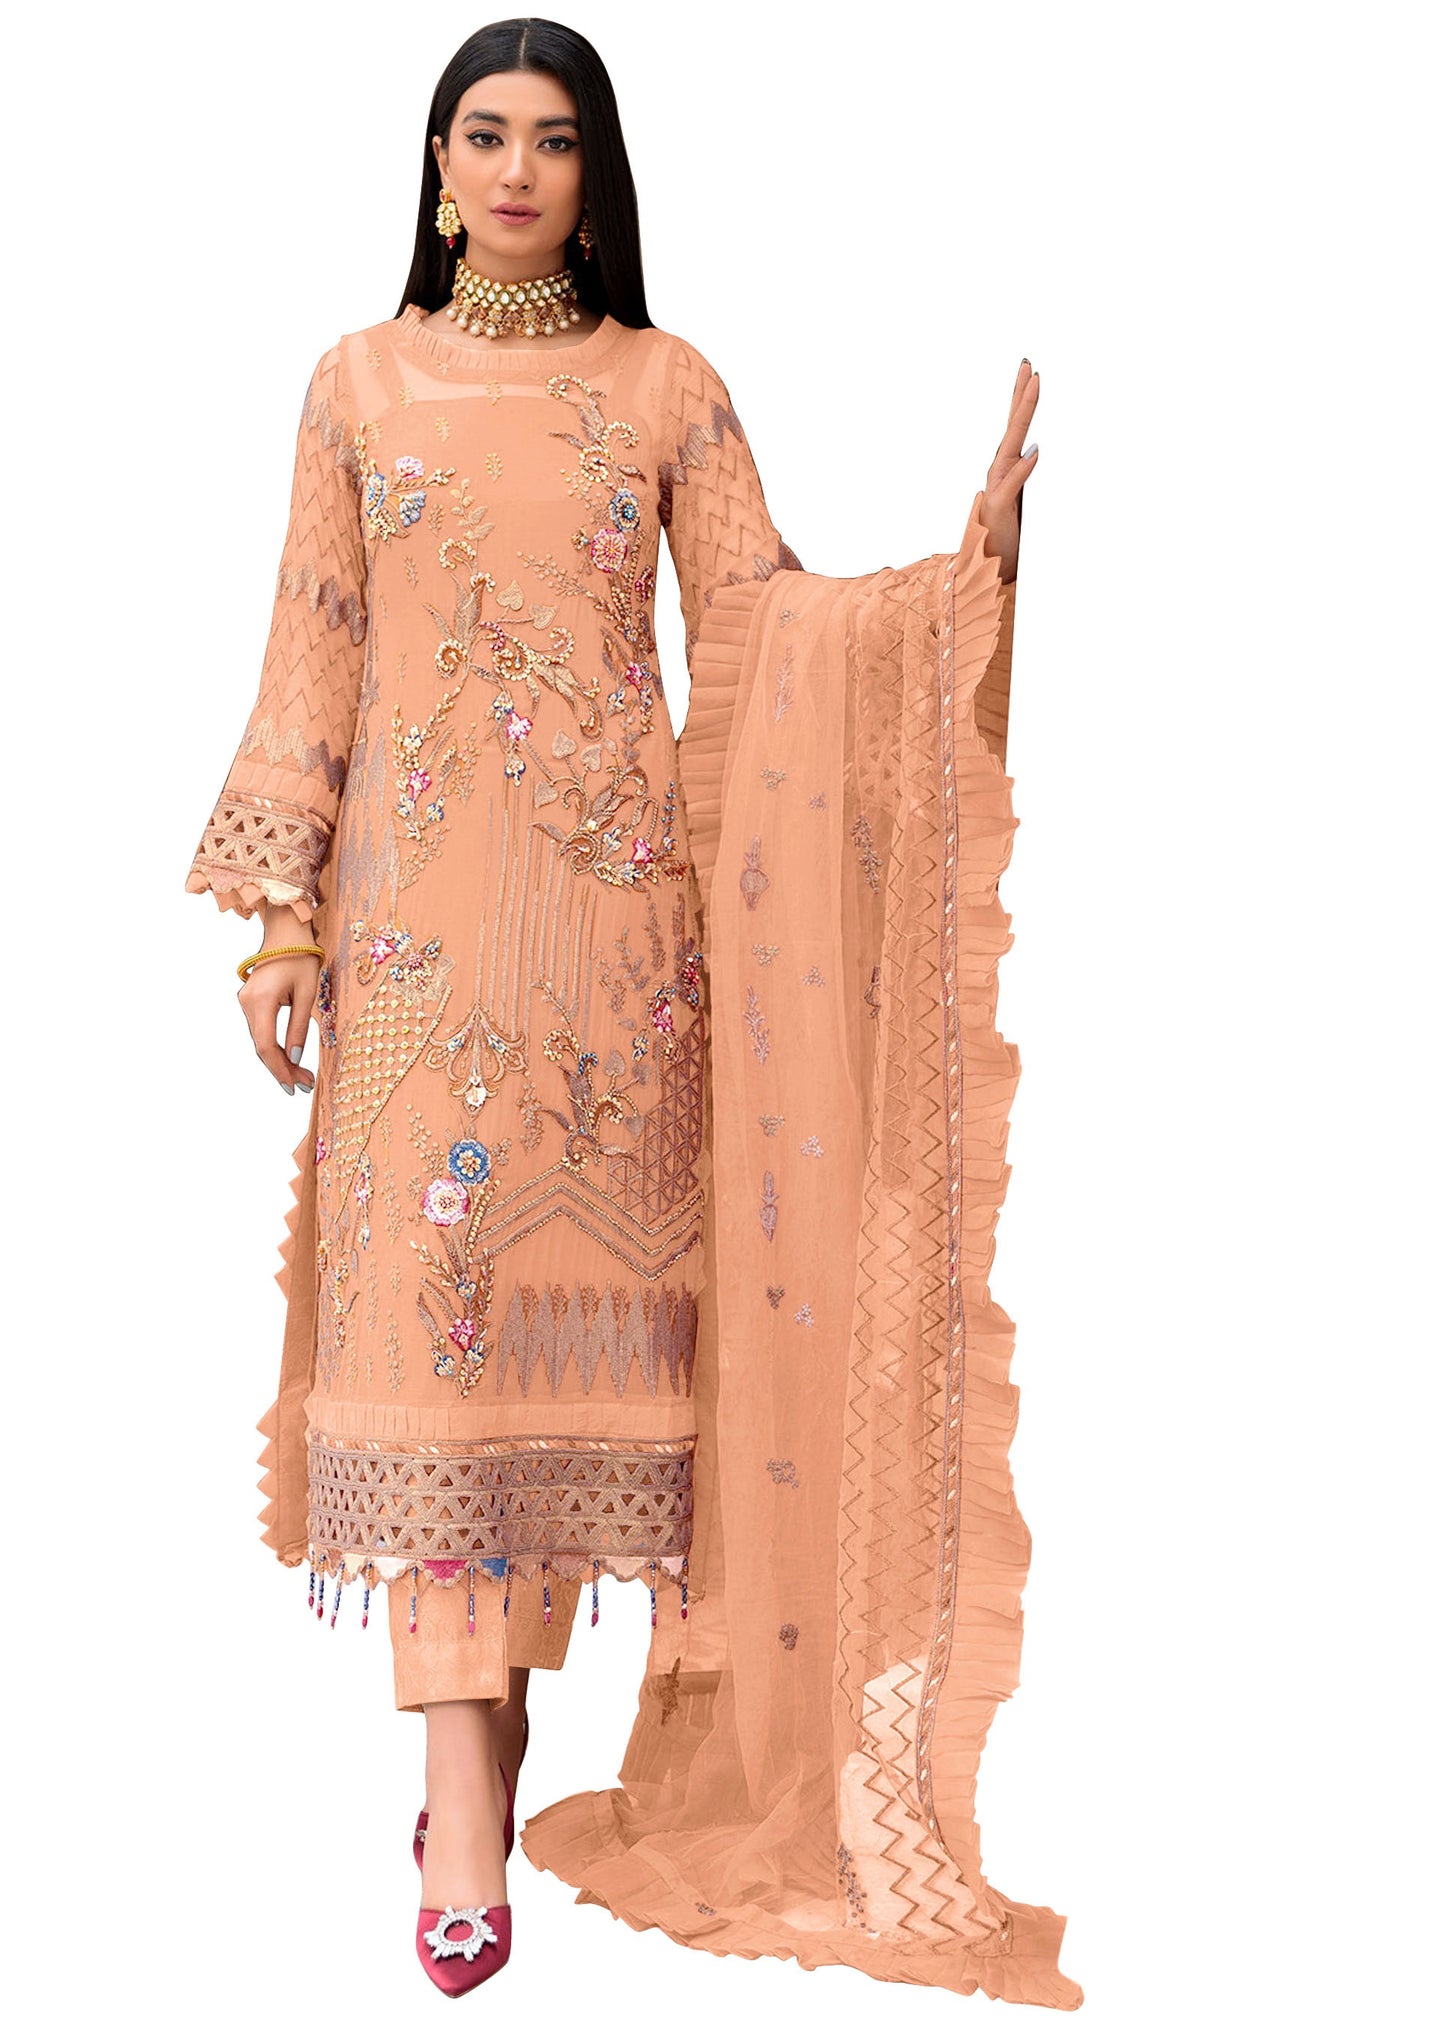 Orange Color Faux Georgette With Sequence Embroidery Work Straight Salwar Suit